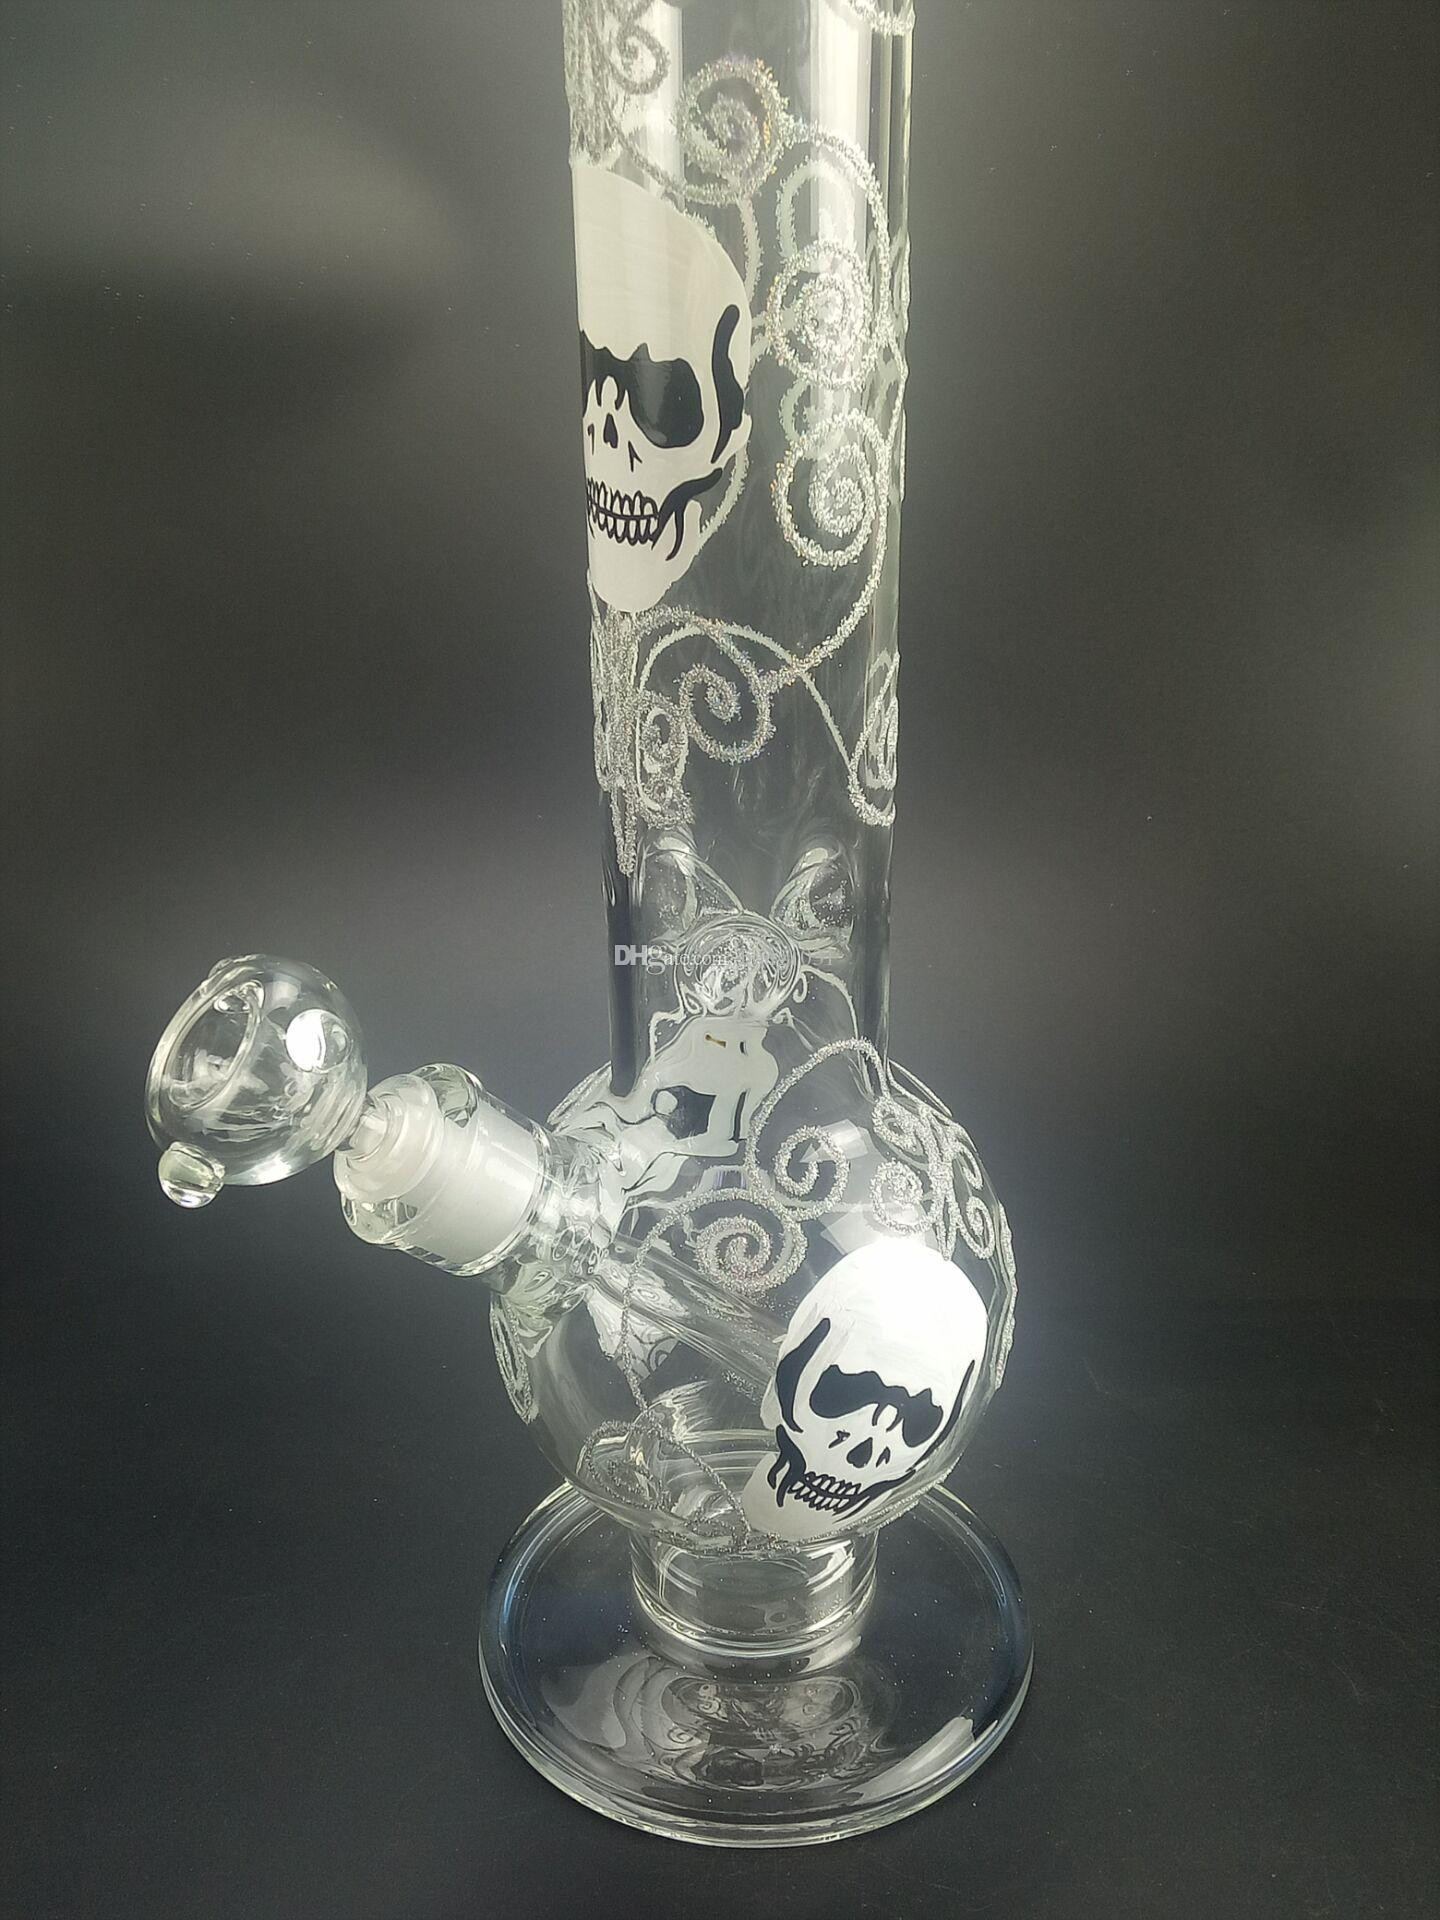 27 Great 20 Inch Glass Vase 2024 free download 20 inch glass vase of 2018 silver skull glass bong hand made high quality and low price in 2018 silver skull glass bong hand made high quality and low price beaker bong dual recovery oil rig